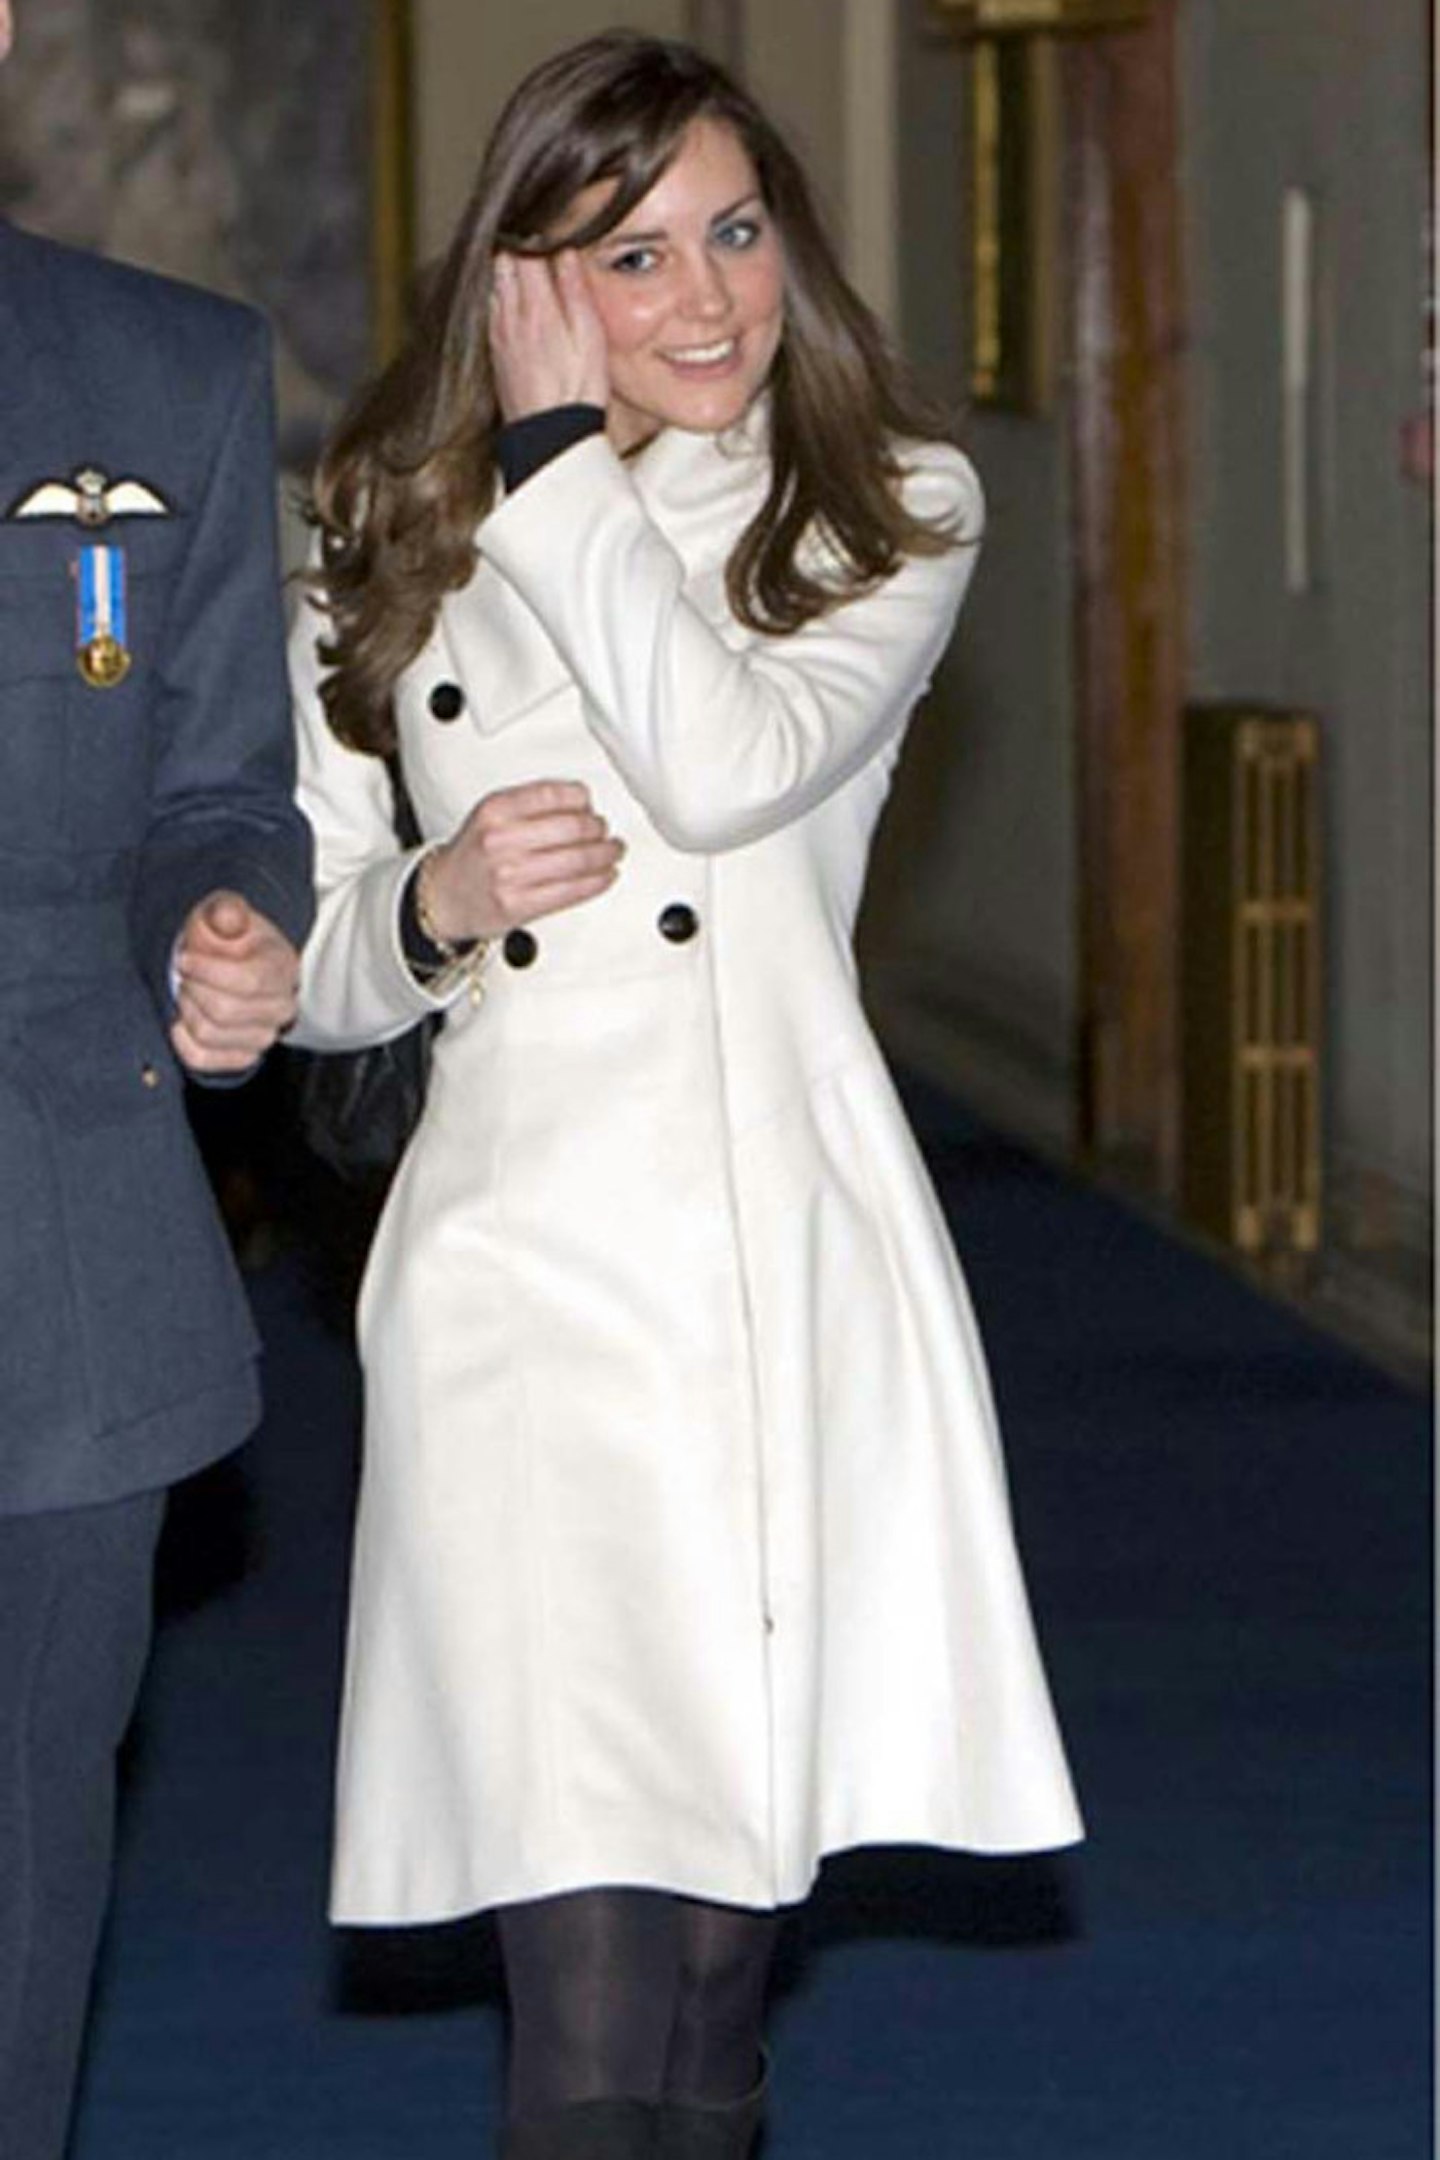 The Duchess of Cambridge Is Pretty in Pink Wearing Gucci - Fashionista